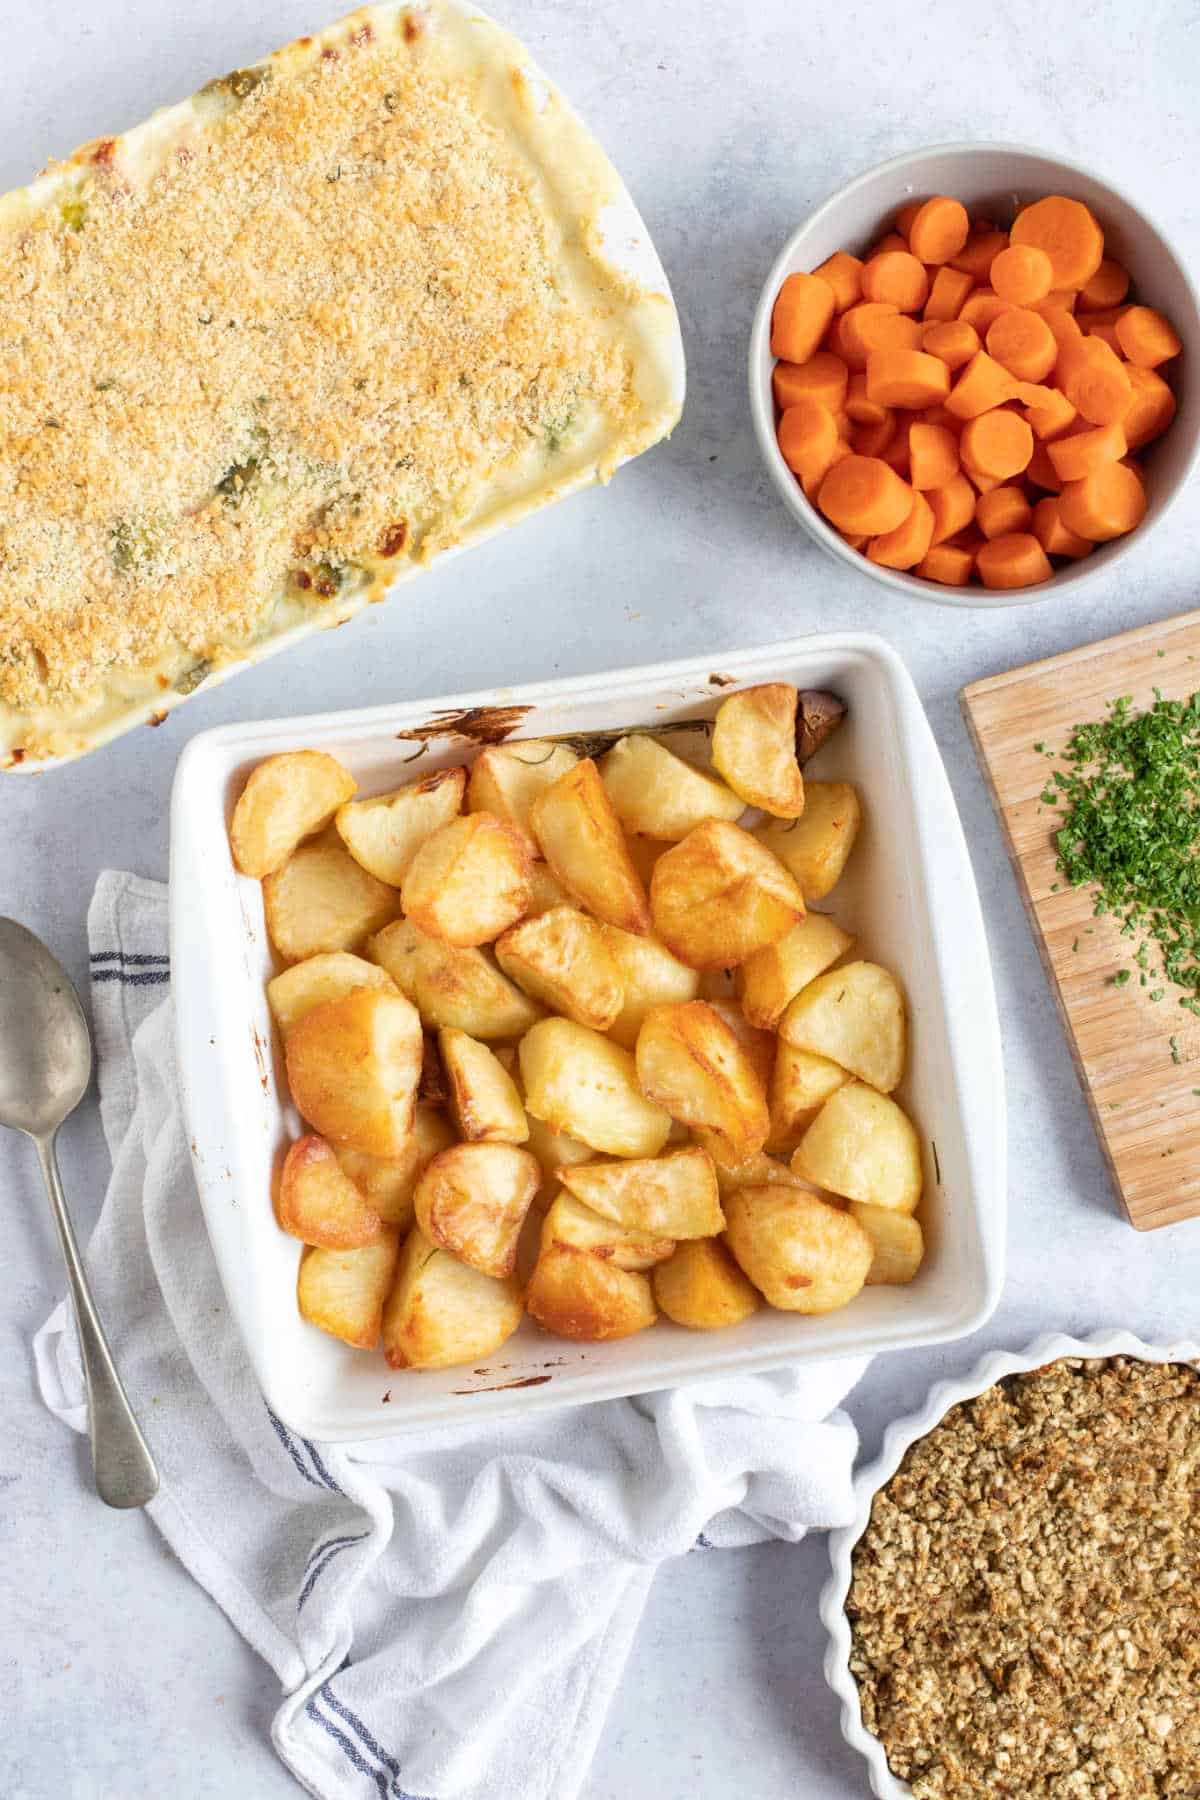 Potatoes in a white dish, with carrots and stuffing.